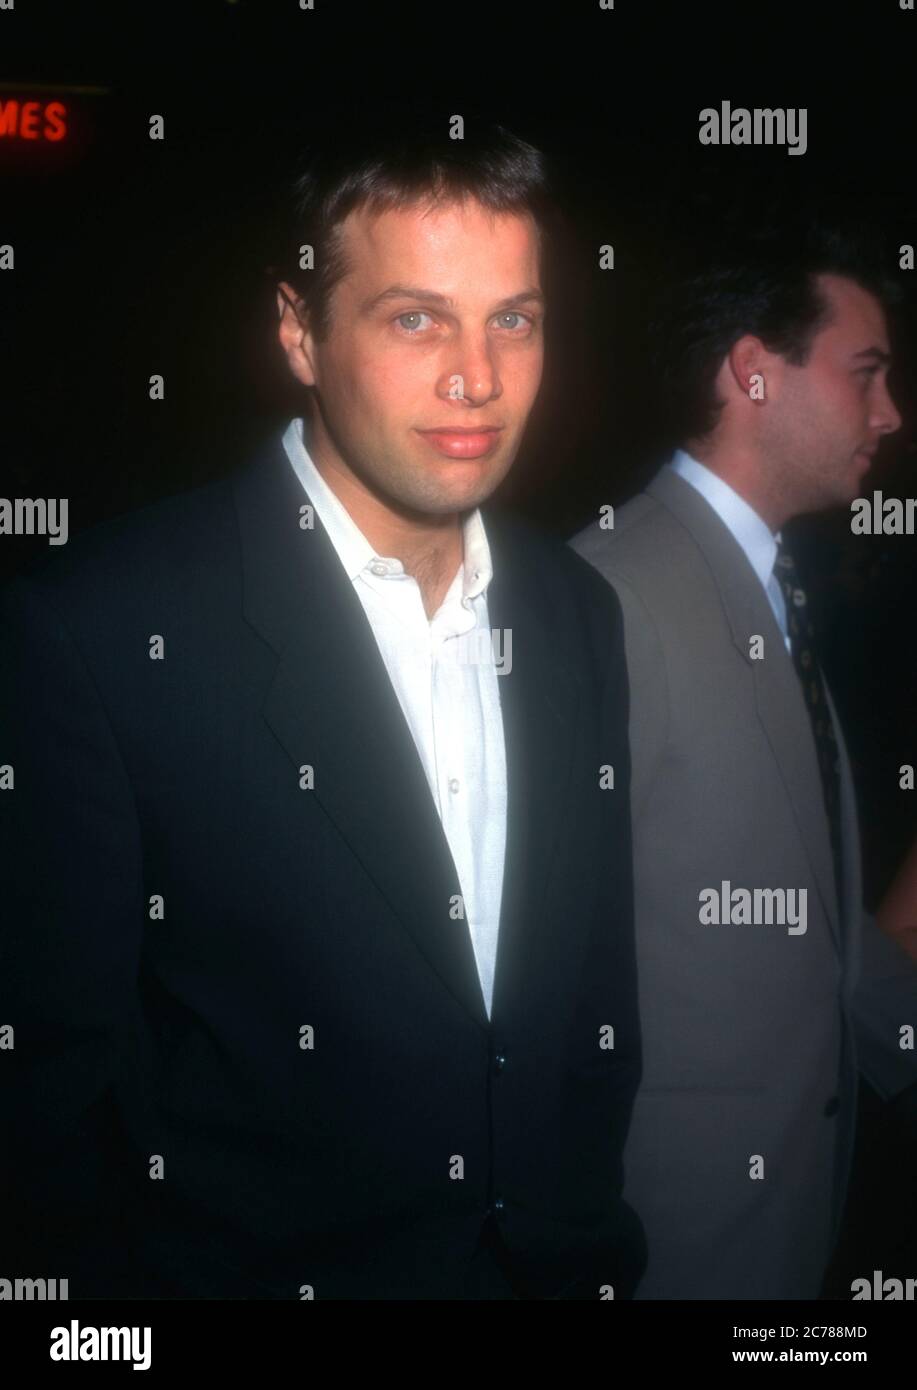 West Hollywood, California, USA 9th January 1996 Actor James LeGros attends Il Postino Premiere on January 9, 1996 at Laemmle's Sunset 5 Theatres in West Hollywood, California, USA. Photo by Barry King/Alamy Stock Photo Stock Photo